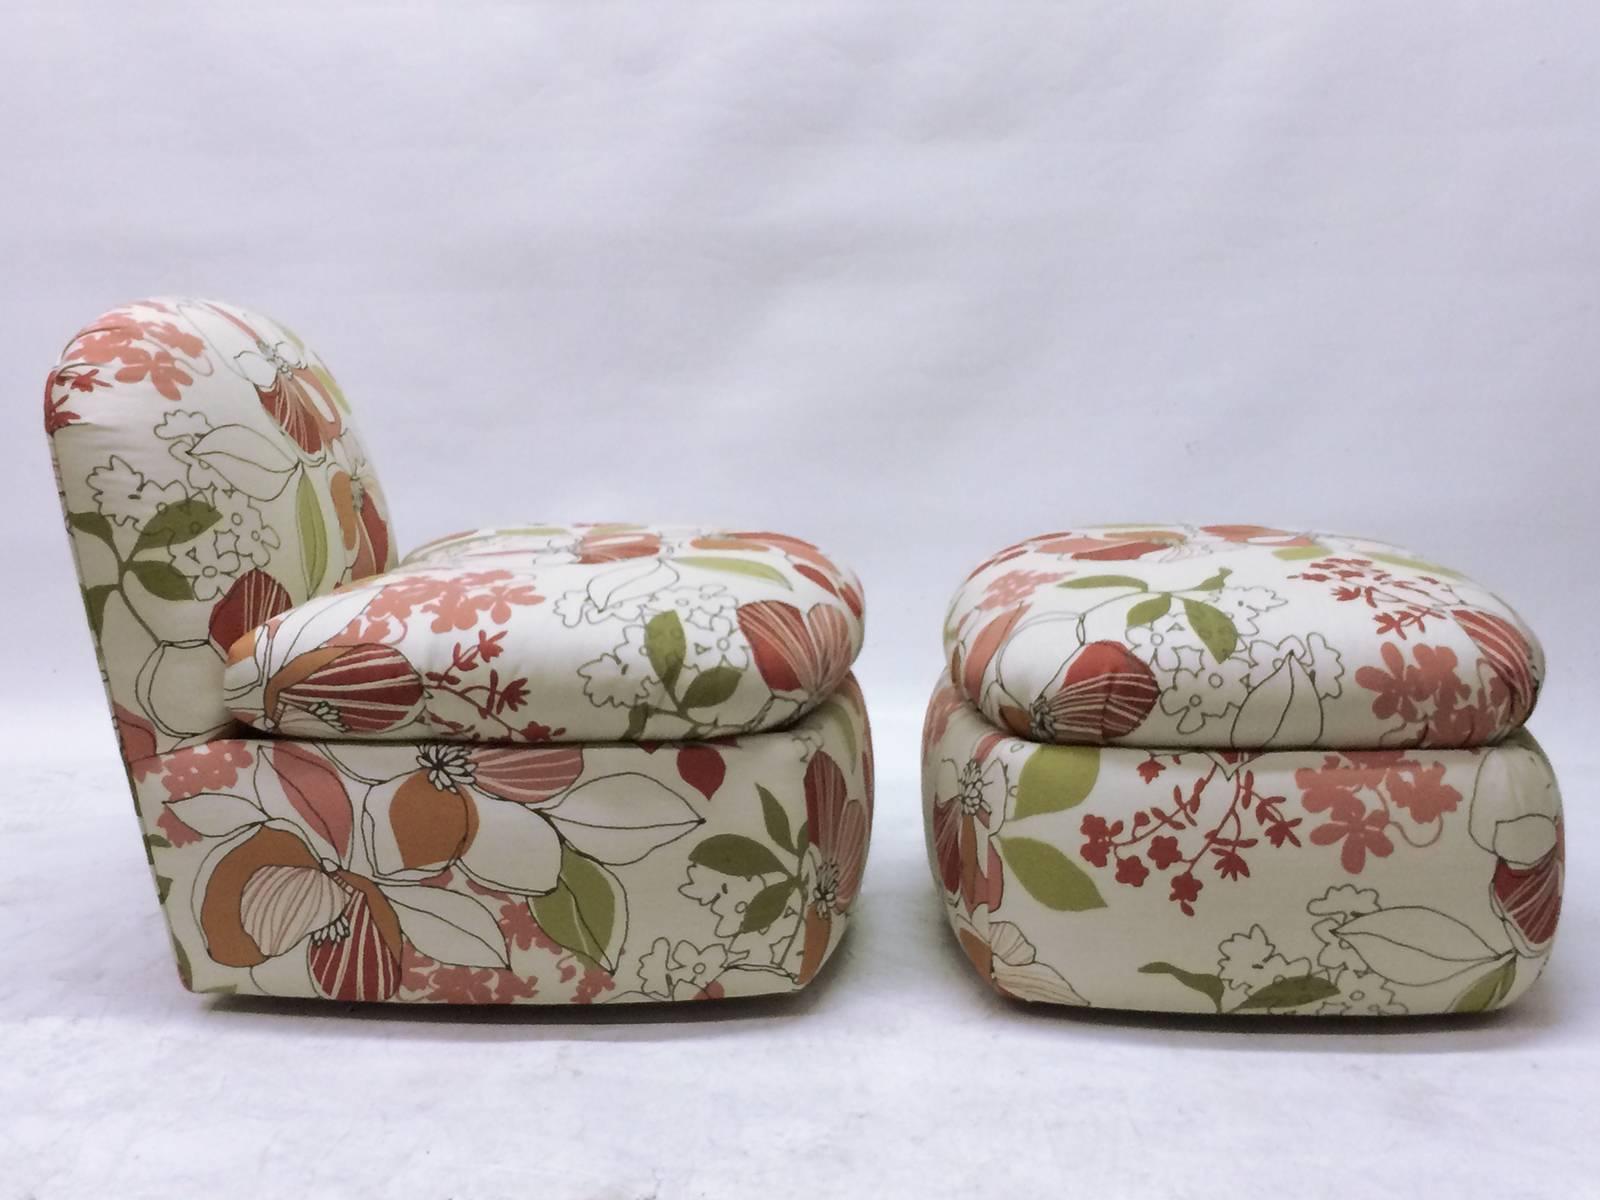 Very comfortable mid Century slipper chair and ottoman in pop feeling floral pattern. The chair is 34 deep by 30 high and 30 wide.  The seat height is 18.   The ottoman is 30 wide by 24 deep and 18 high as well.  